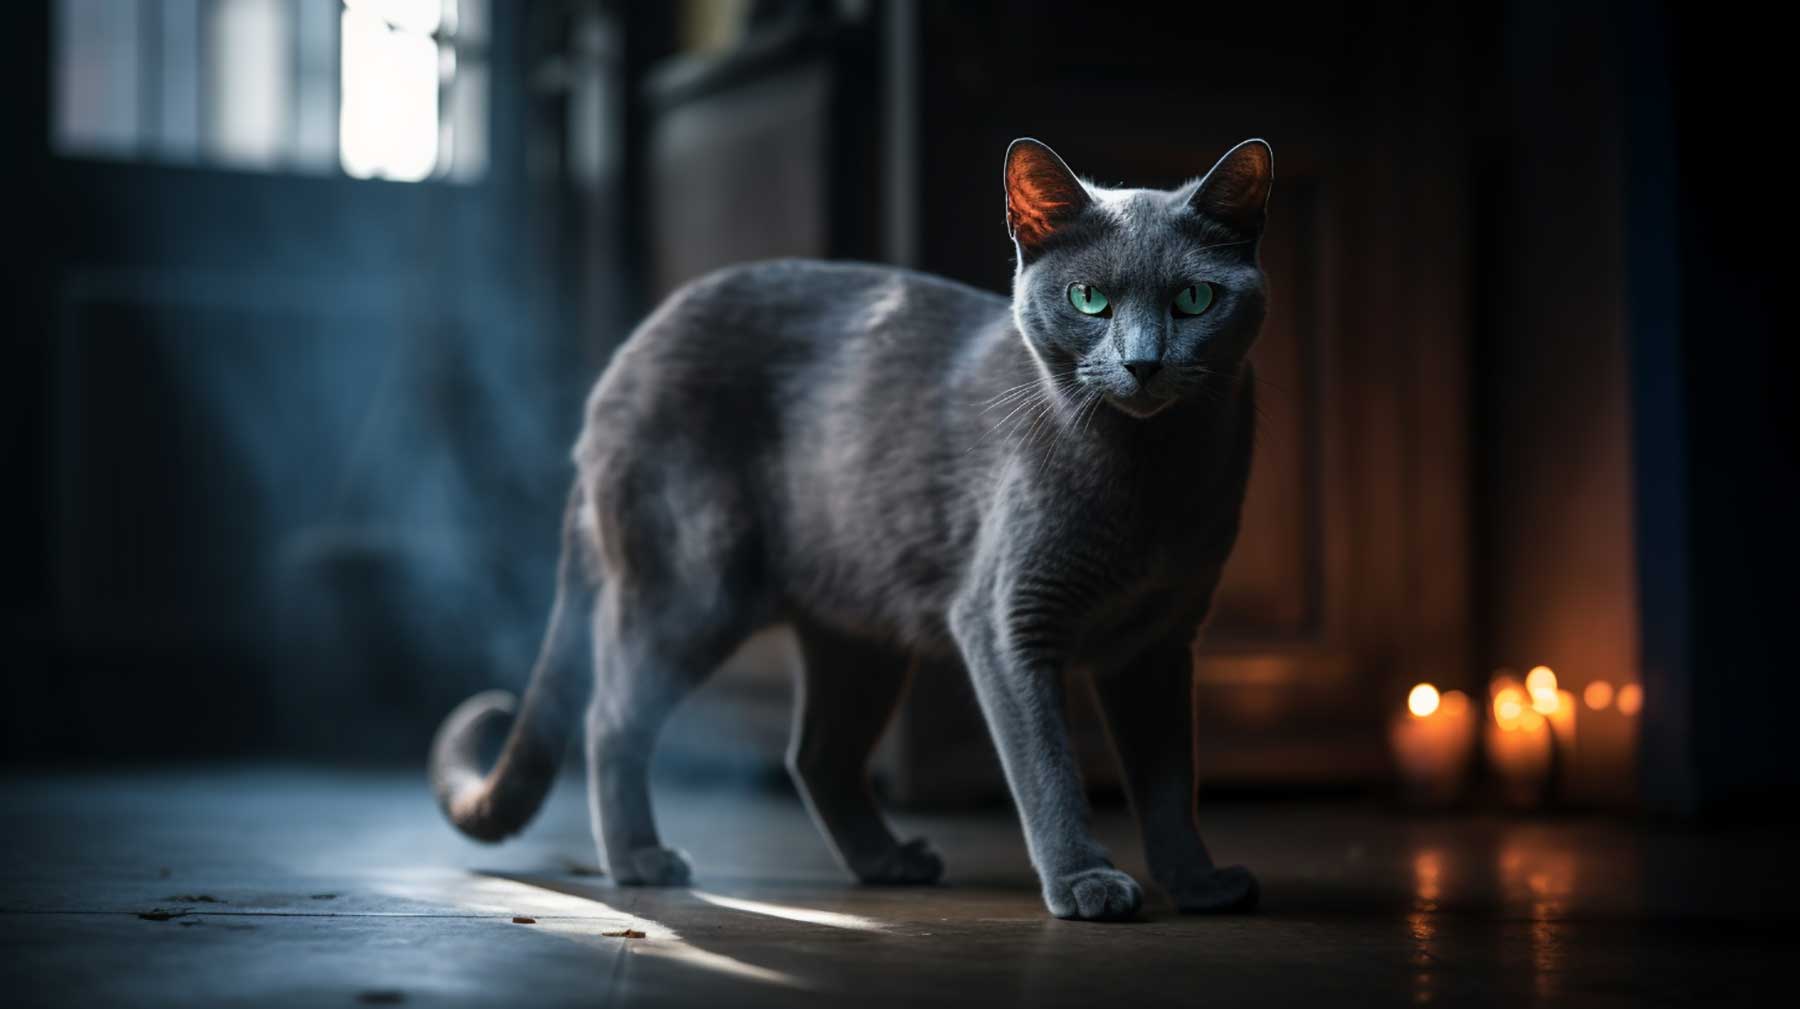 Russian Blue cat standing in apartment